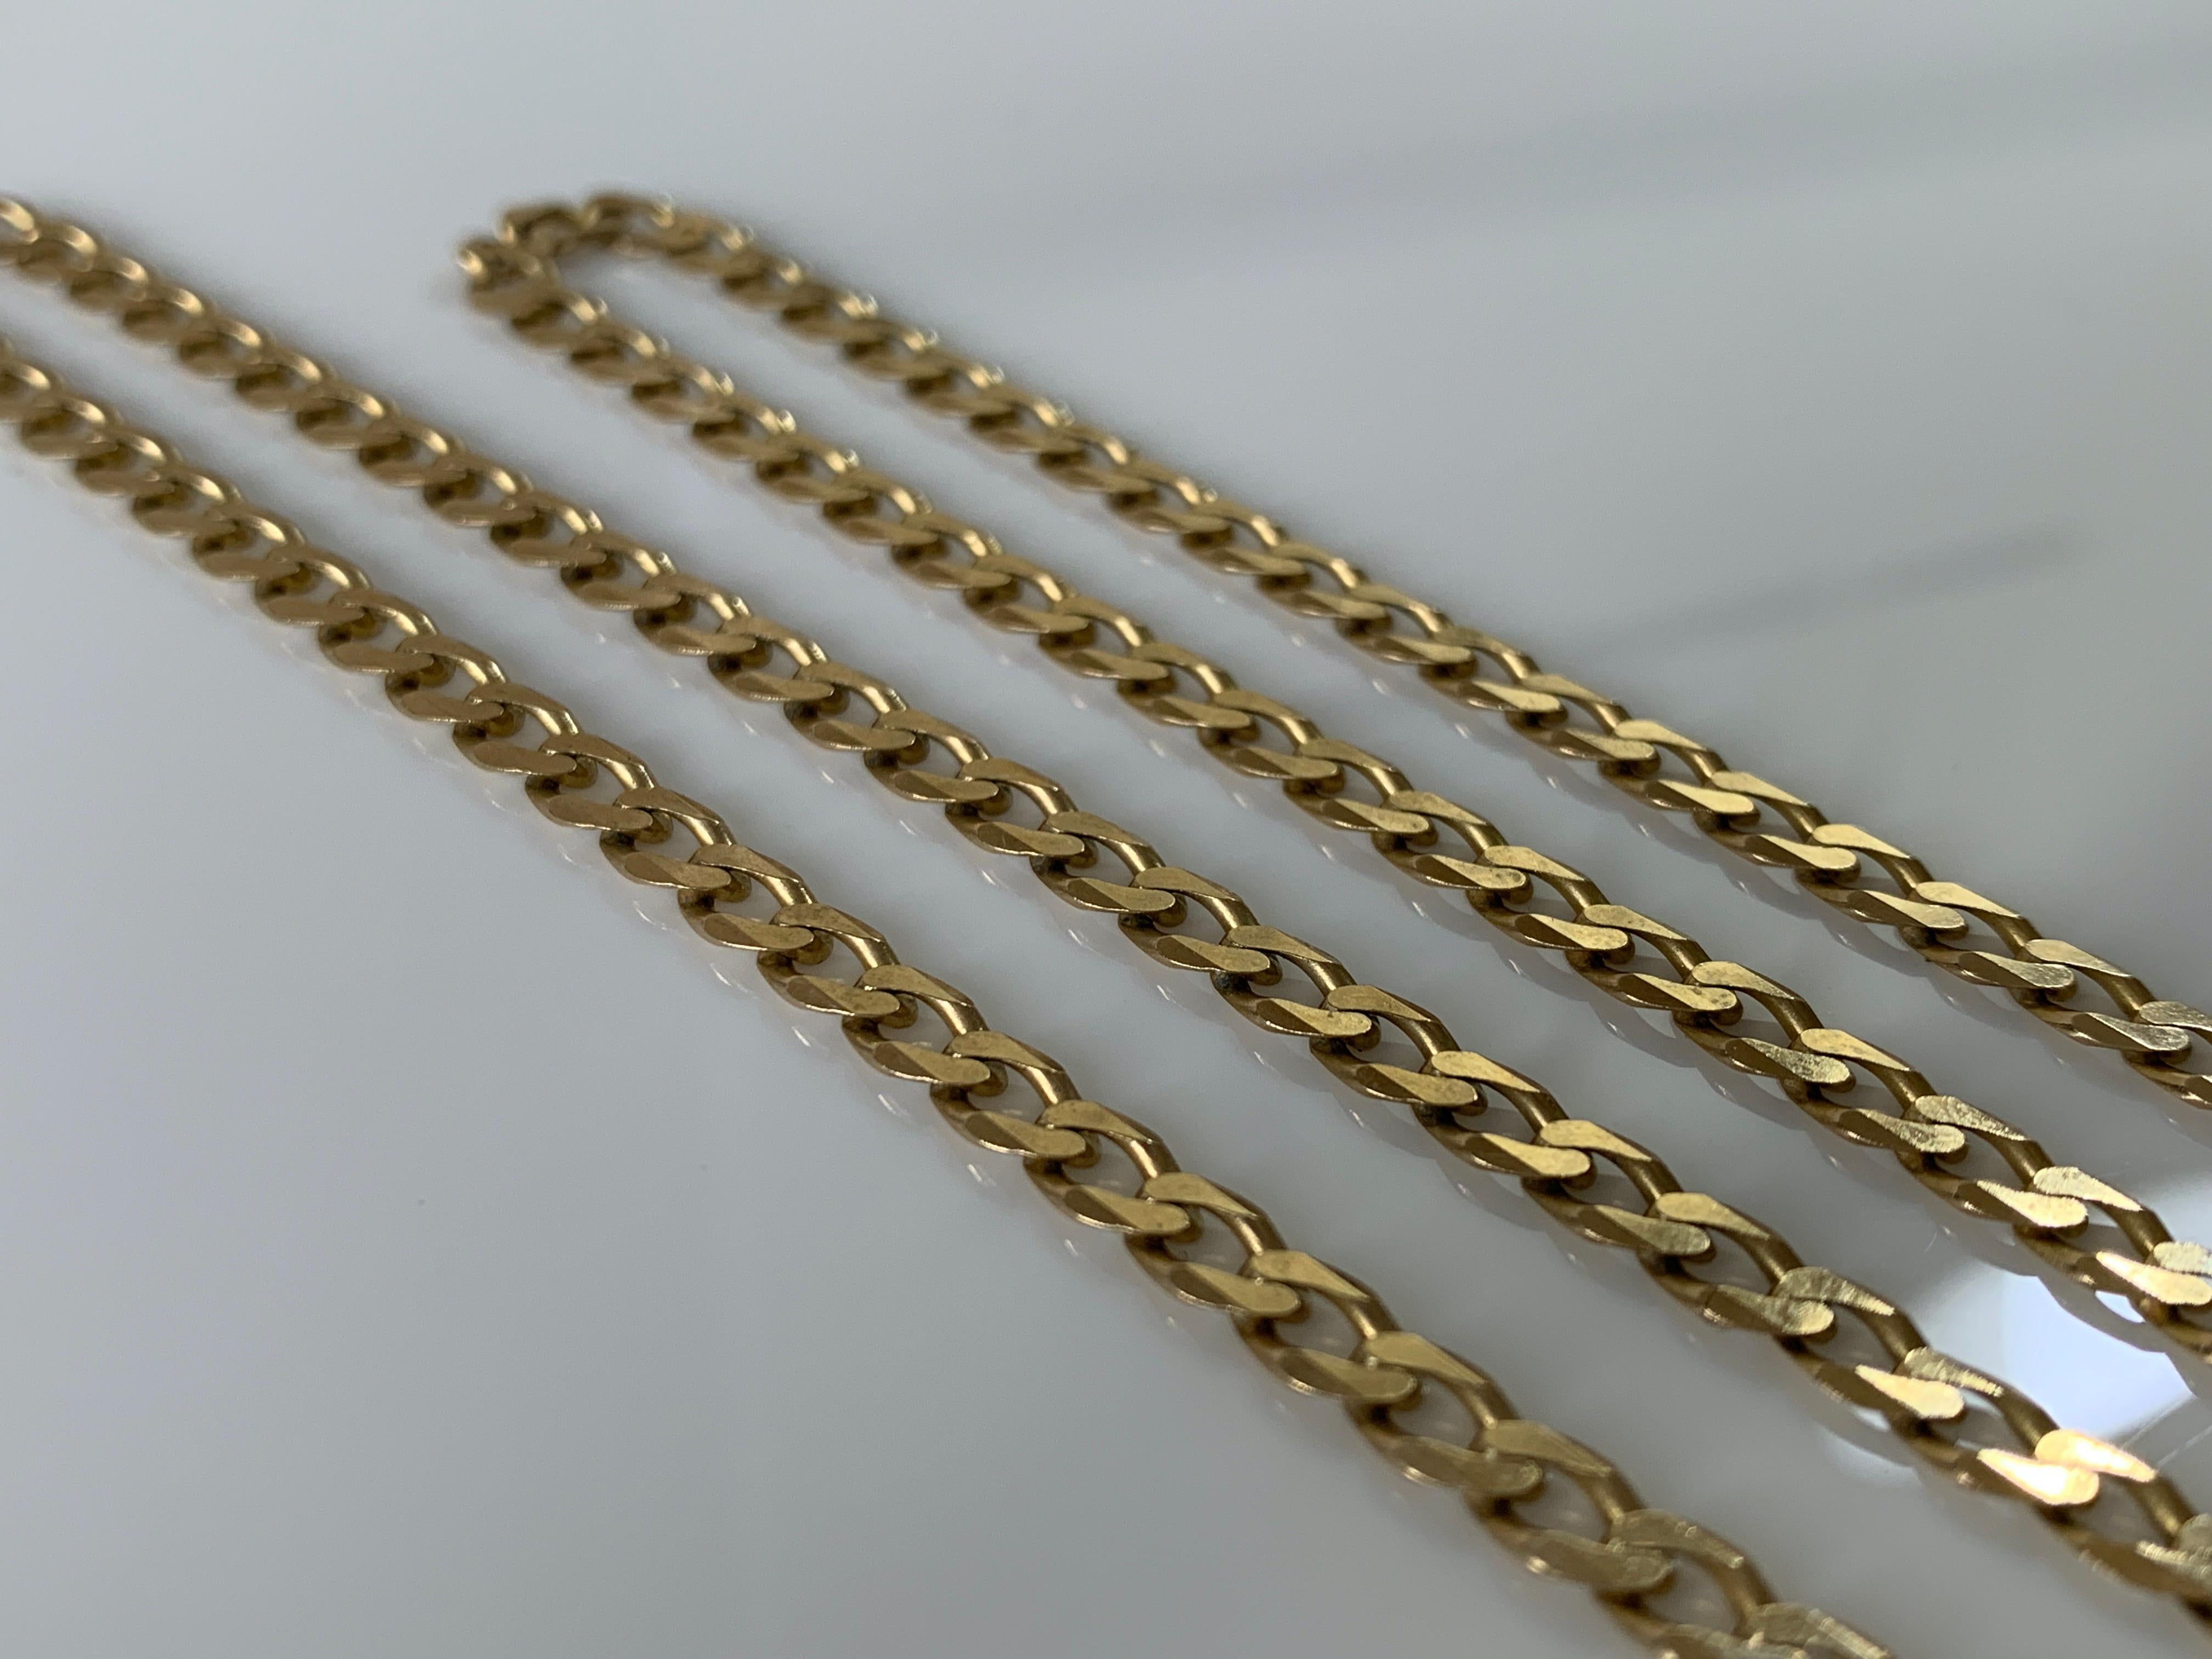 9ct 375 Gold Vintage Long Curb Chain 
Era 1990s
dated 1998
17.7 grams
Like New condition
